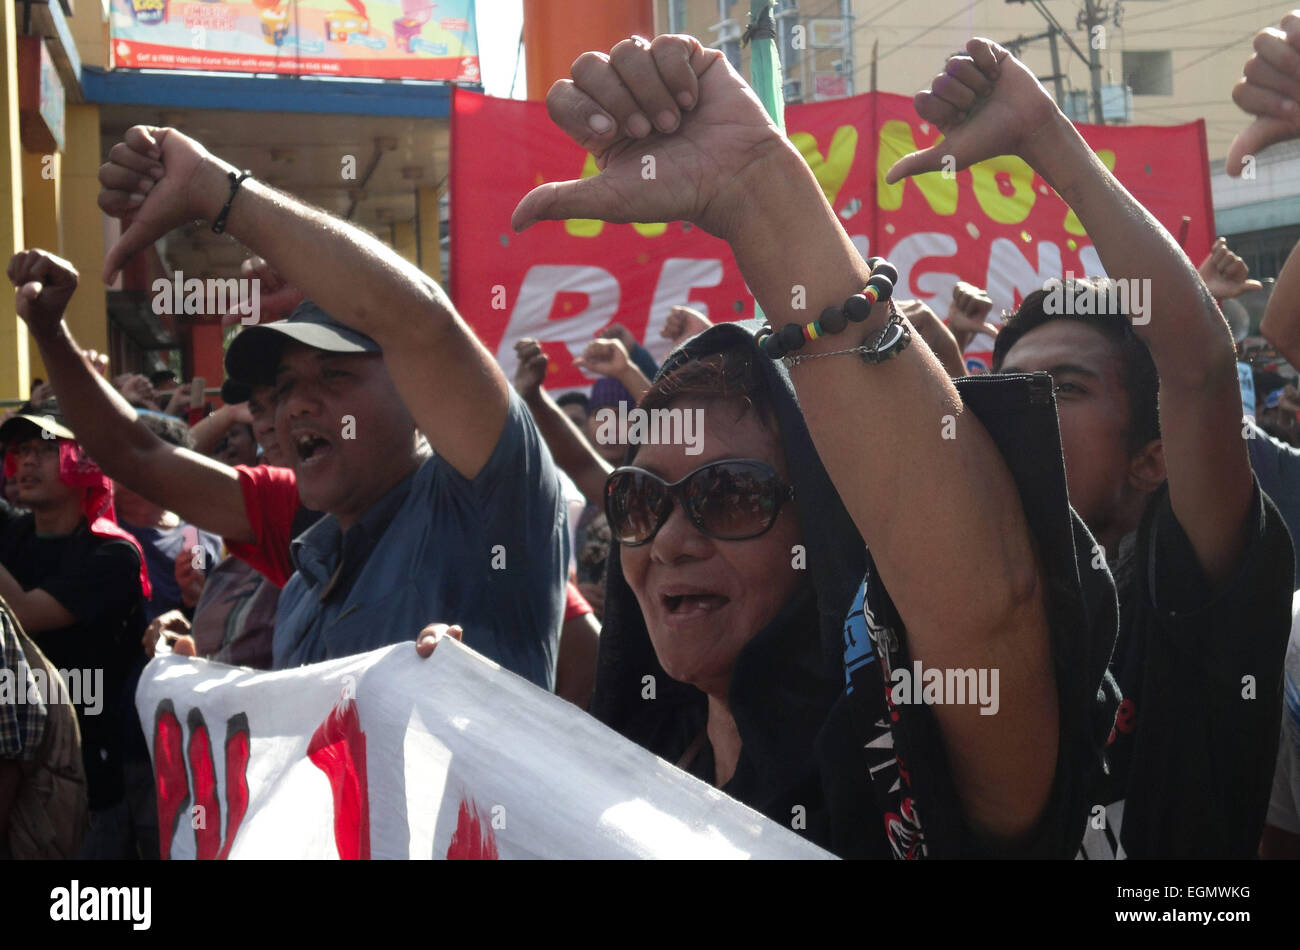 Manila, Philippines. 27th February, 2015. Protesters make the thumbs-down gesture during a rally at Mendiola Bridge near Malacanang Palace. The protesters are calling for the resignation of President Benigno Aquino III over the Mamasapano incident that resulted in the deaths of wanted Malaysian bombmaker Zulkifri 'Marwan' bin Hir, 44 police commandos, 18 Muslim rebels, and 8 civilians. Credit:  Richard James Mendoza/Pacific Press/Alamy Live News Stock Photo